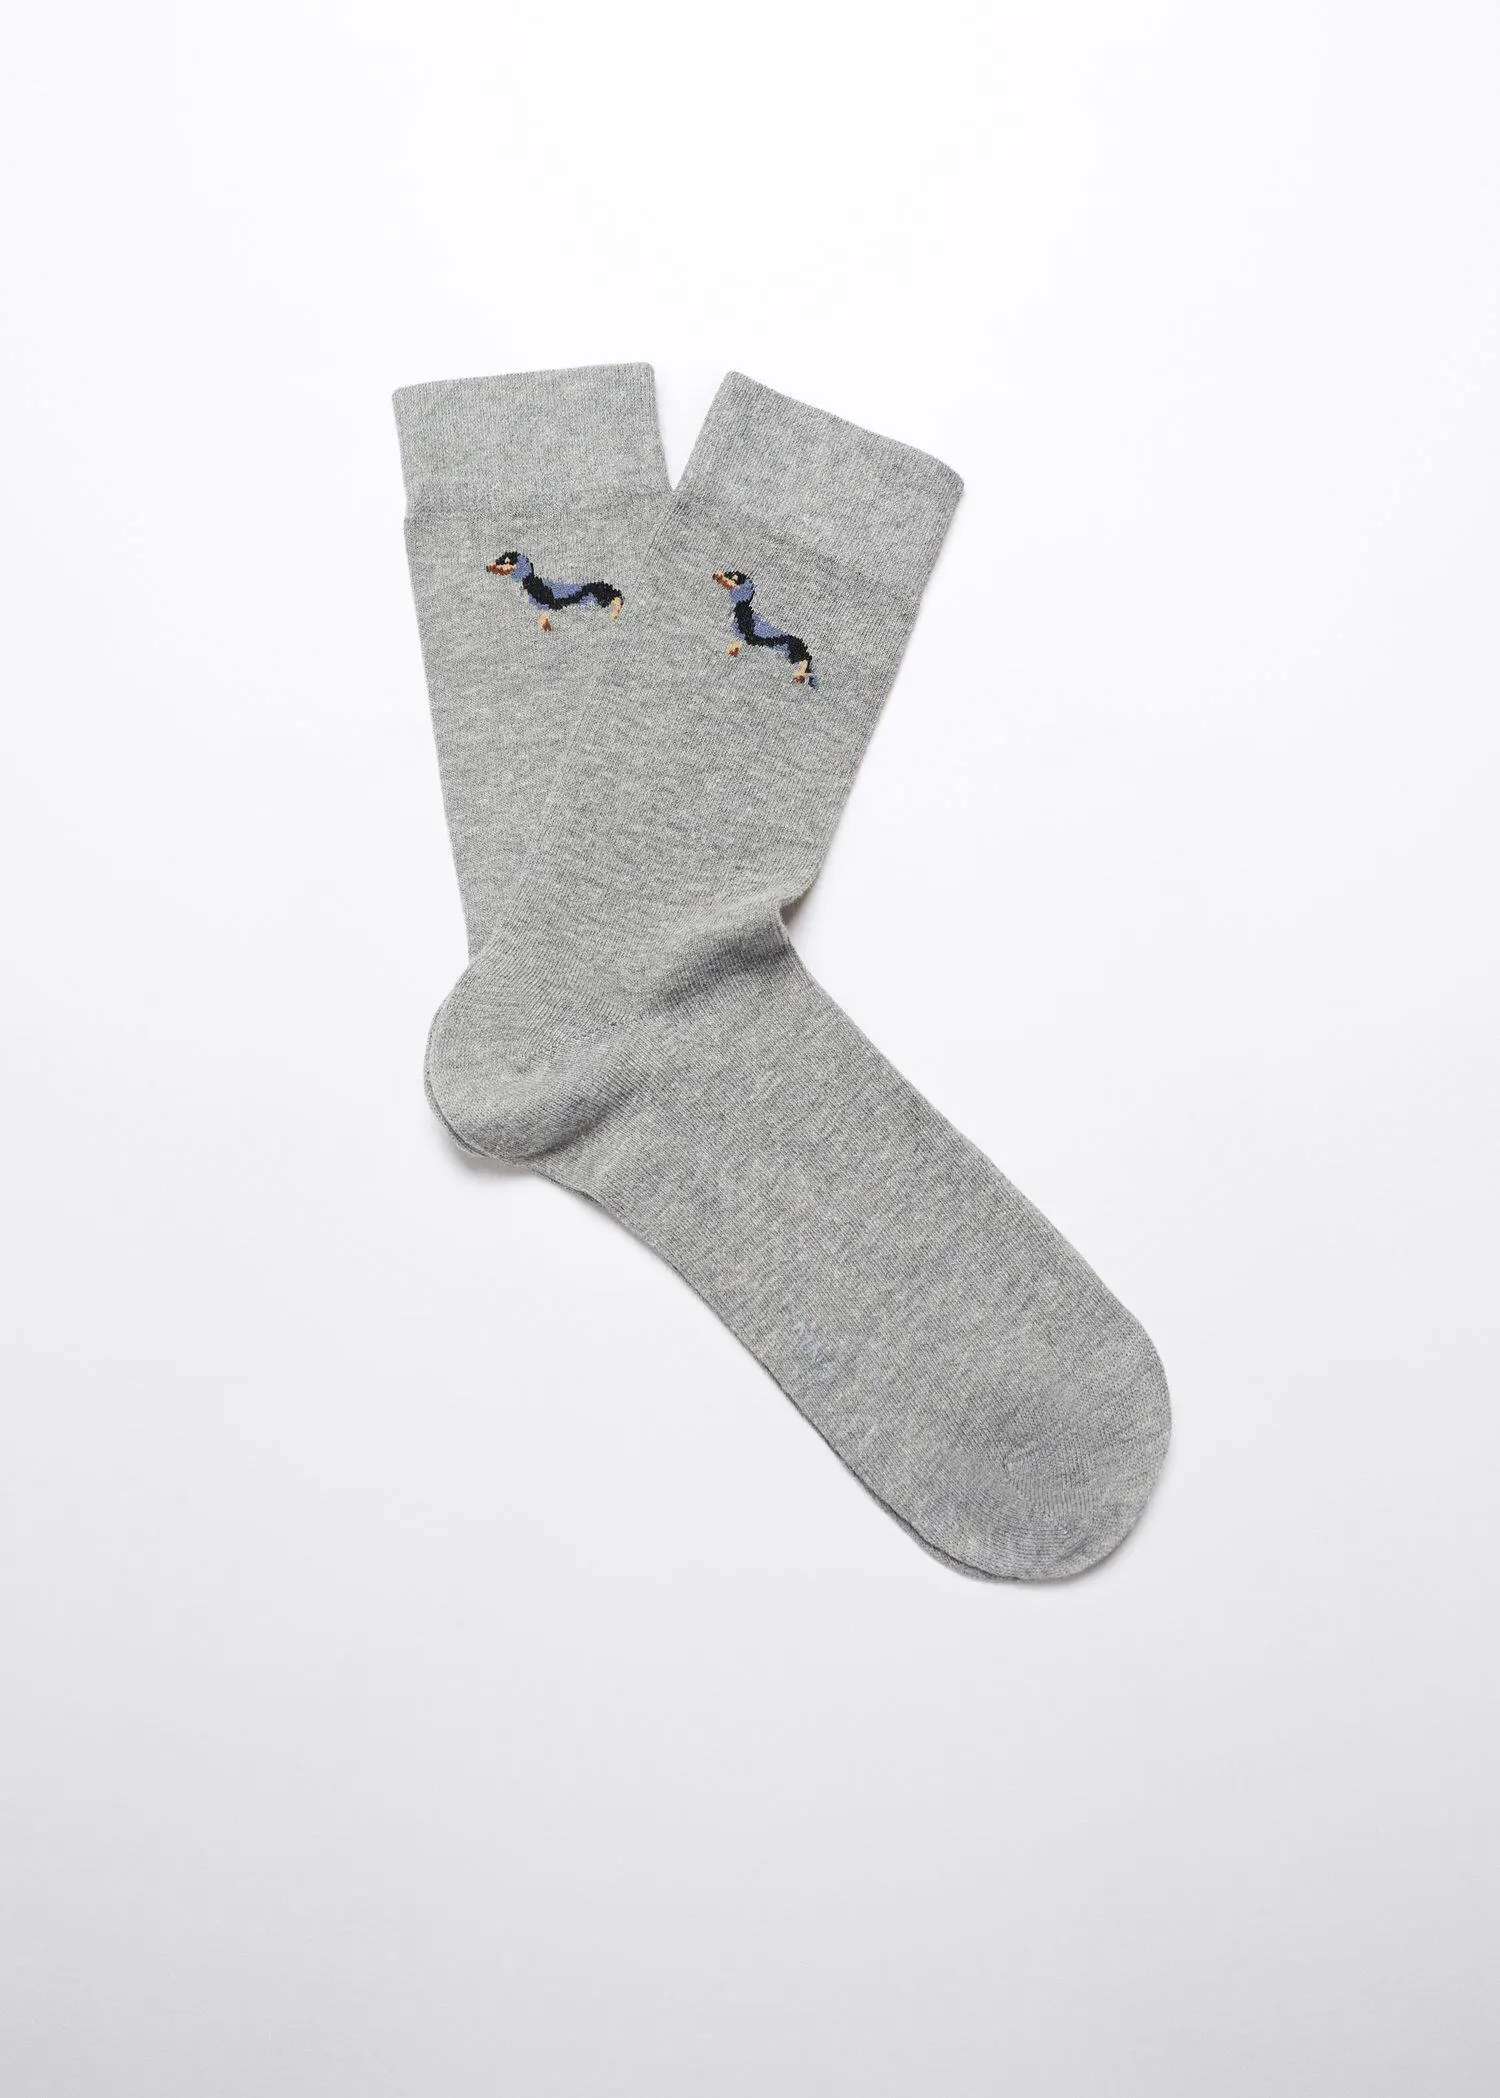 Mango Dog-embroidered cotton socks. a pair of grey socks with a dachshund on them. 